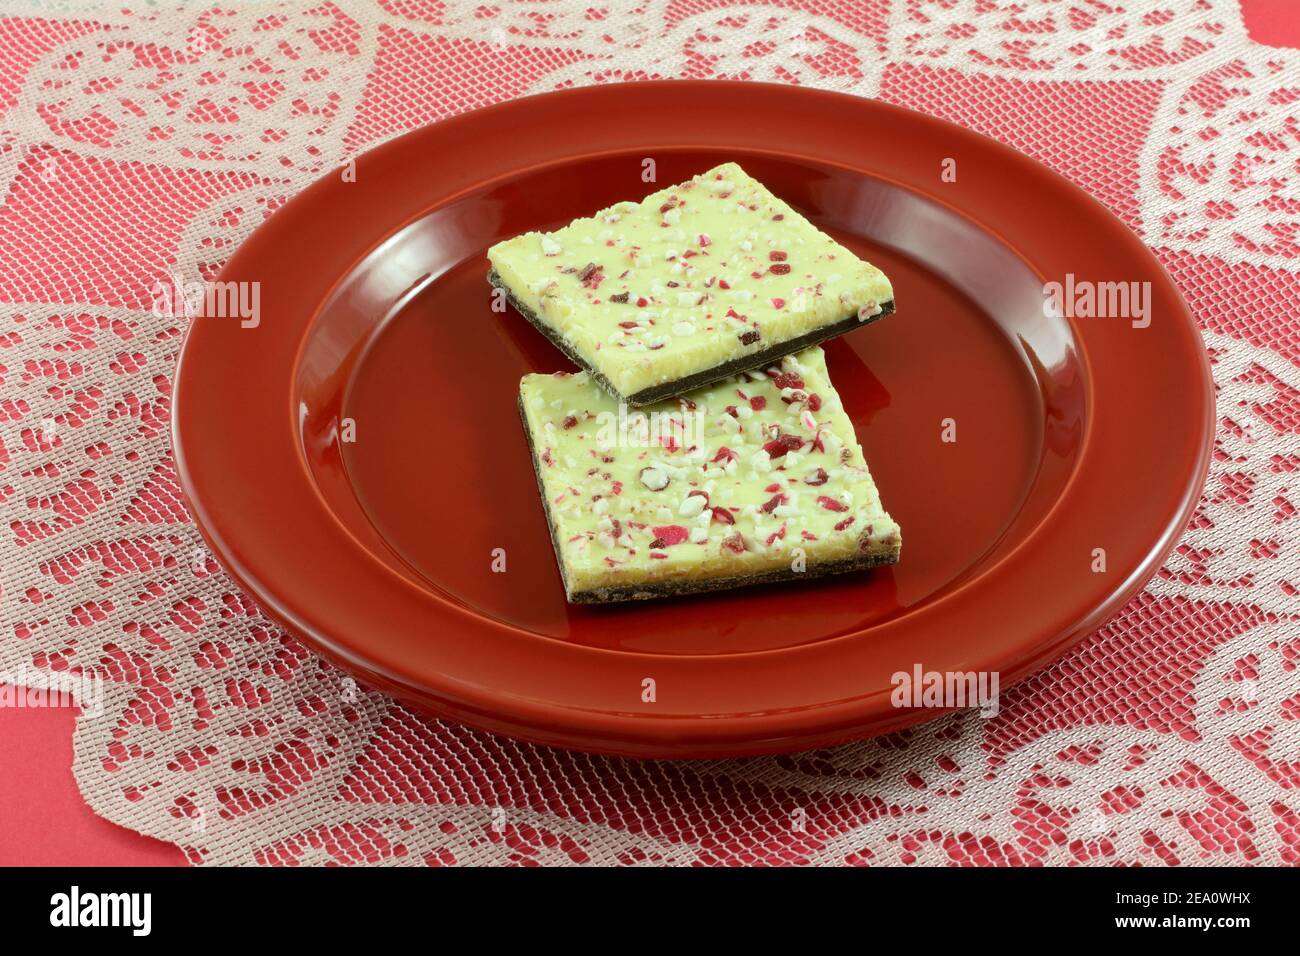 White chocolate peppermint bark on top of dark chococlate candy on red plate on heart lace tablecloth runner Stock Photo